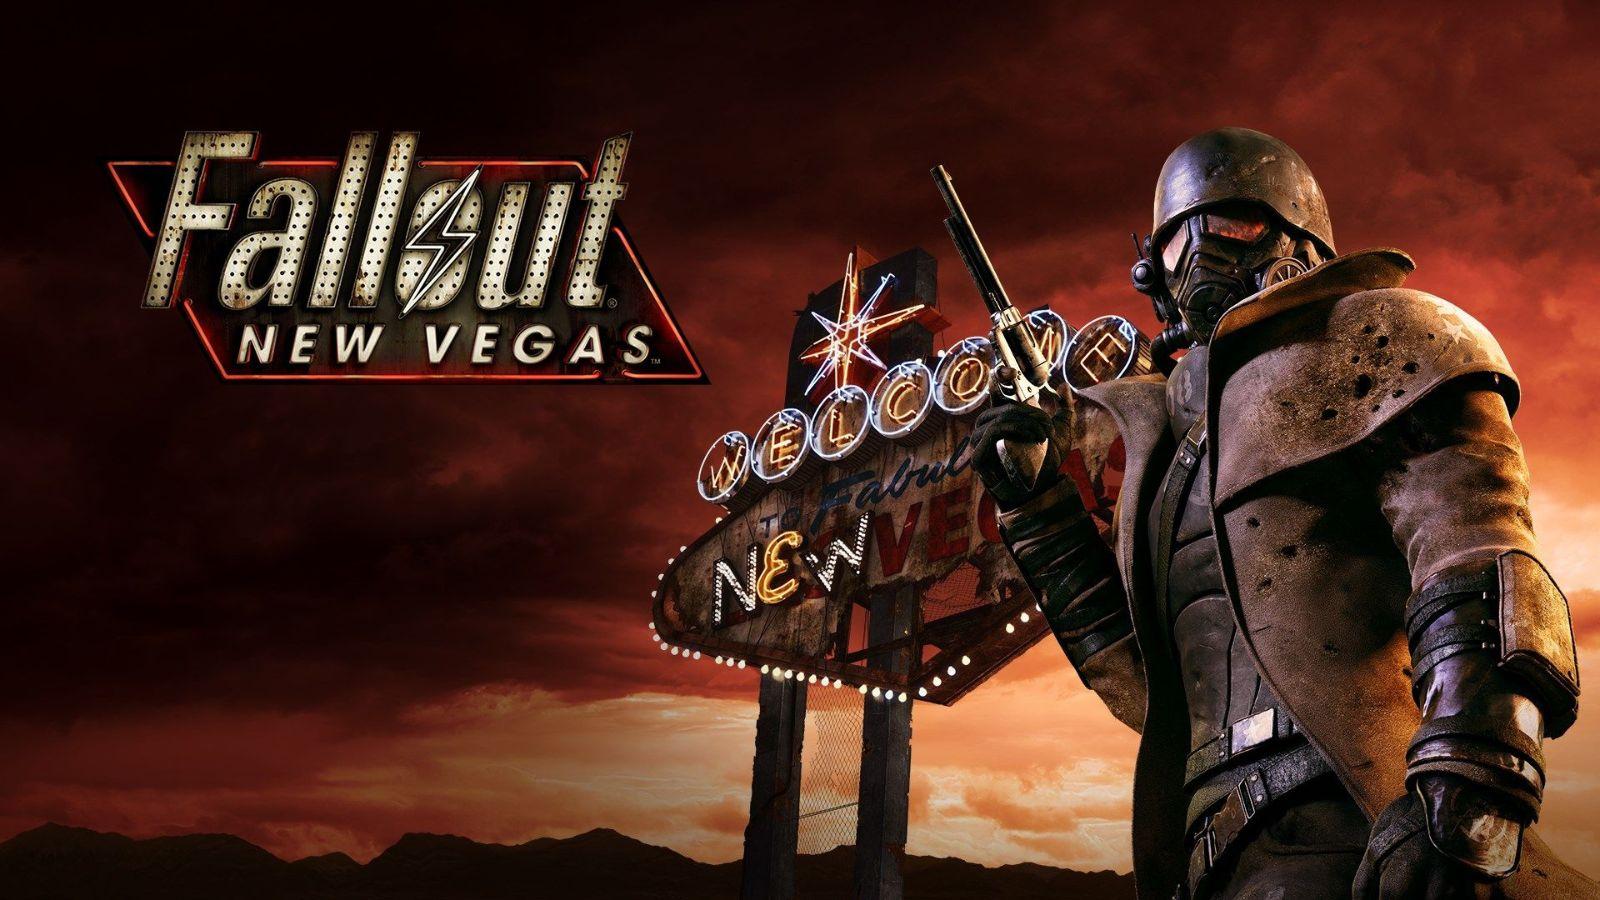 Fallout New Vegas 2 CONFIRMED?! 